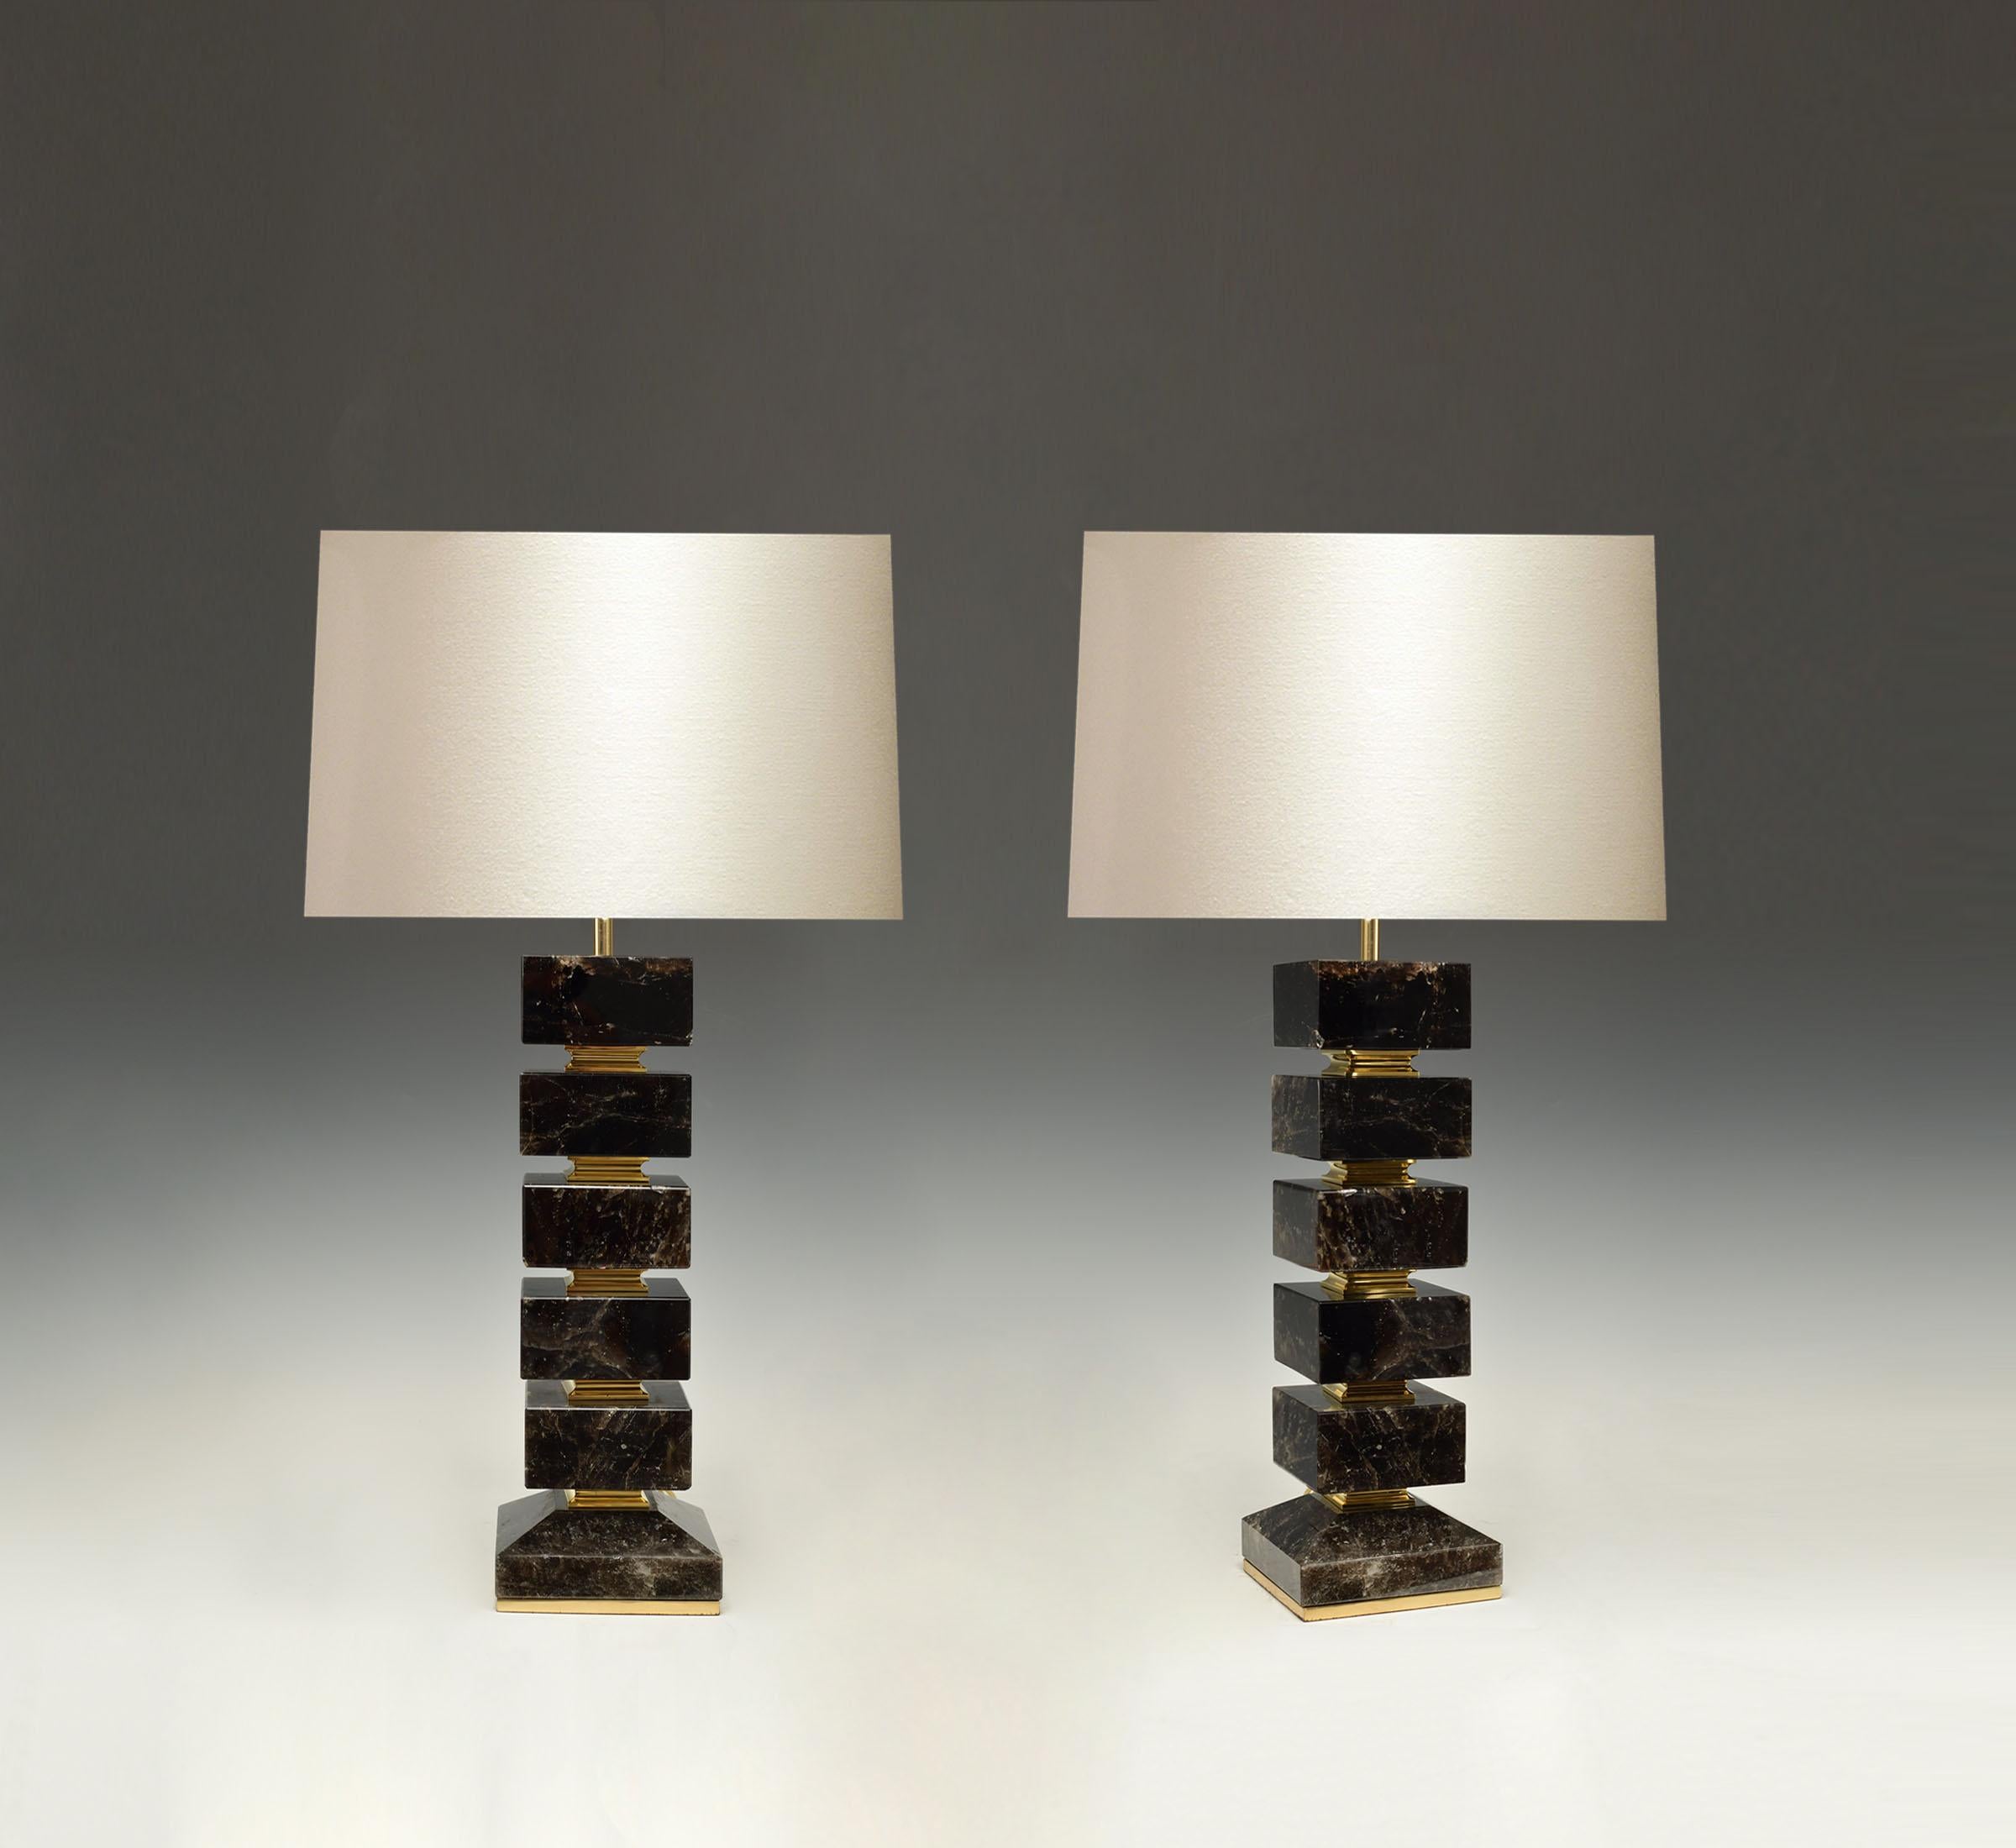 A large pair of block form dark rock crystal quartz lamps with polished brass bases. Created by Phoenix Gallery, NYC.
Available in nickel plating and antique brass finished. 
Each lamp installed with two sockets, 75 watts each socket, total of 150